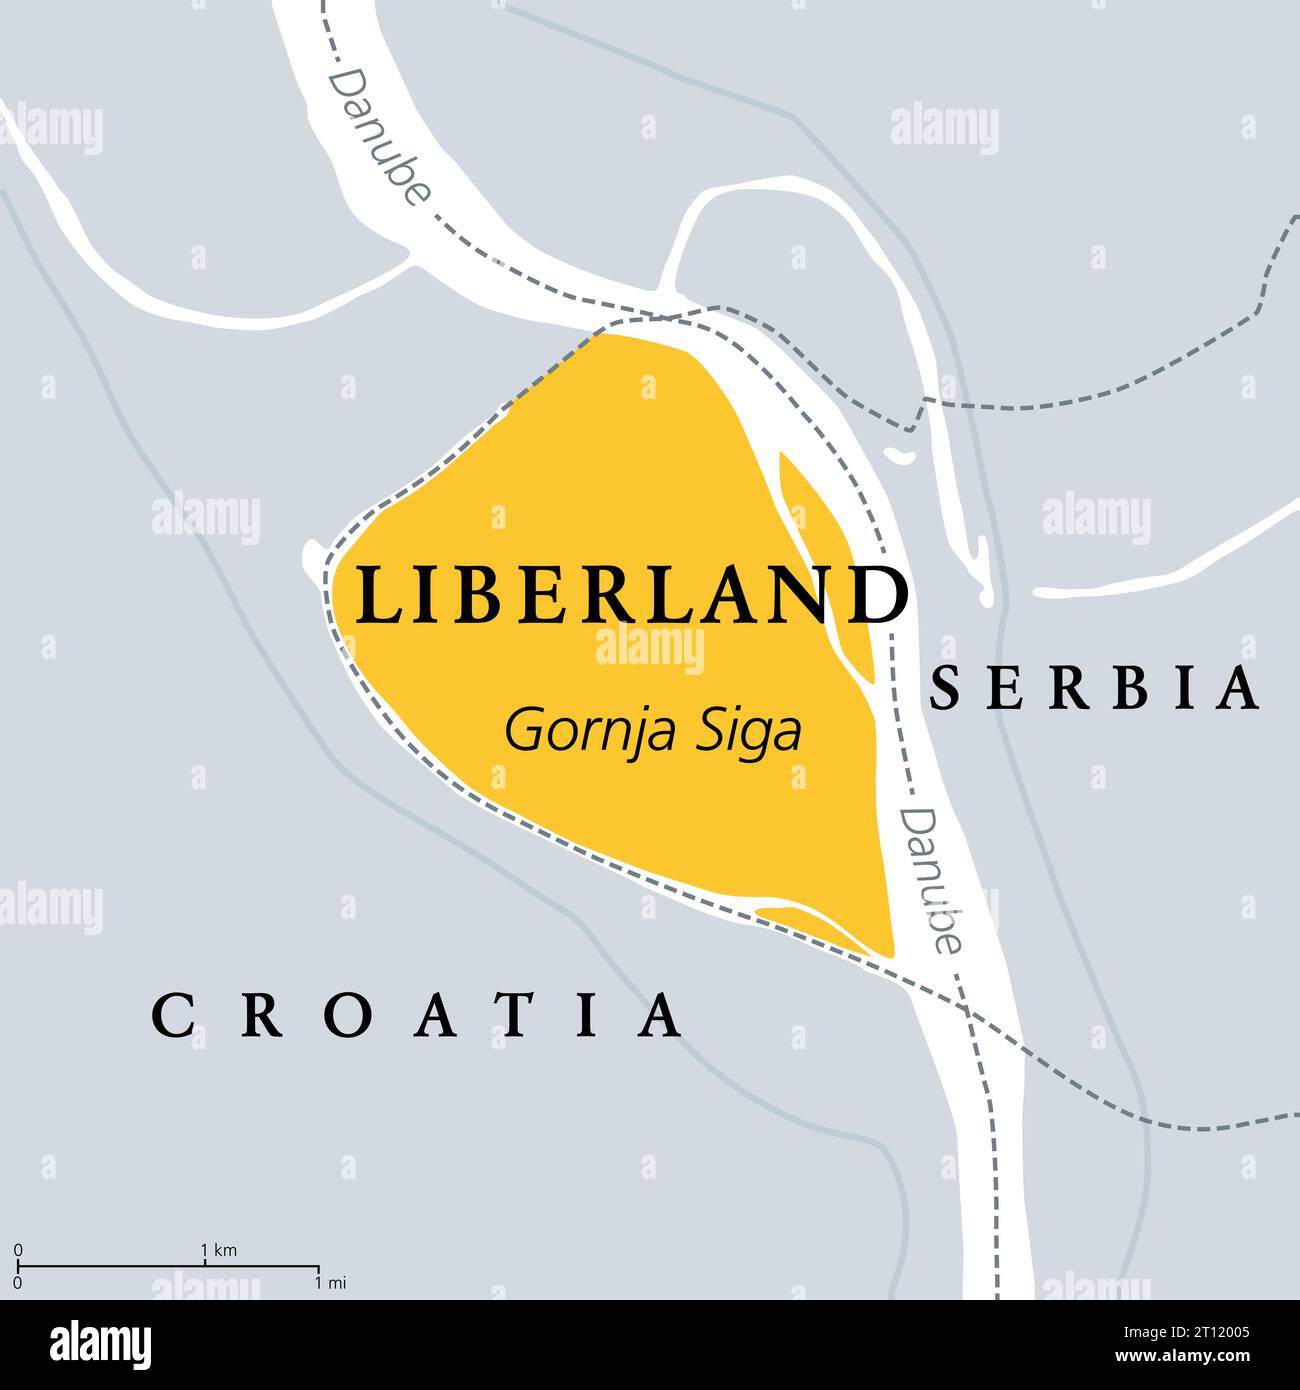 Free Republic of Liberland, political map. Unrecognized micronation in Europe, claiming uninhabited disputed land on Danube between Croatia and Serbia. Stock Photo